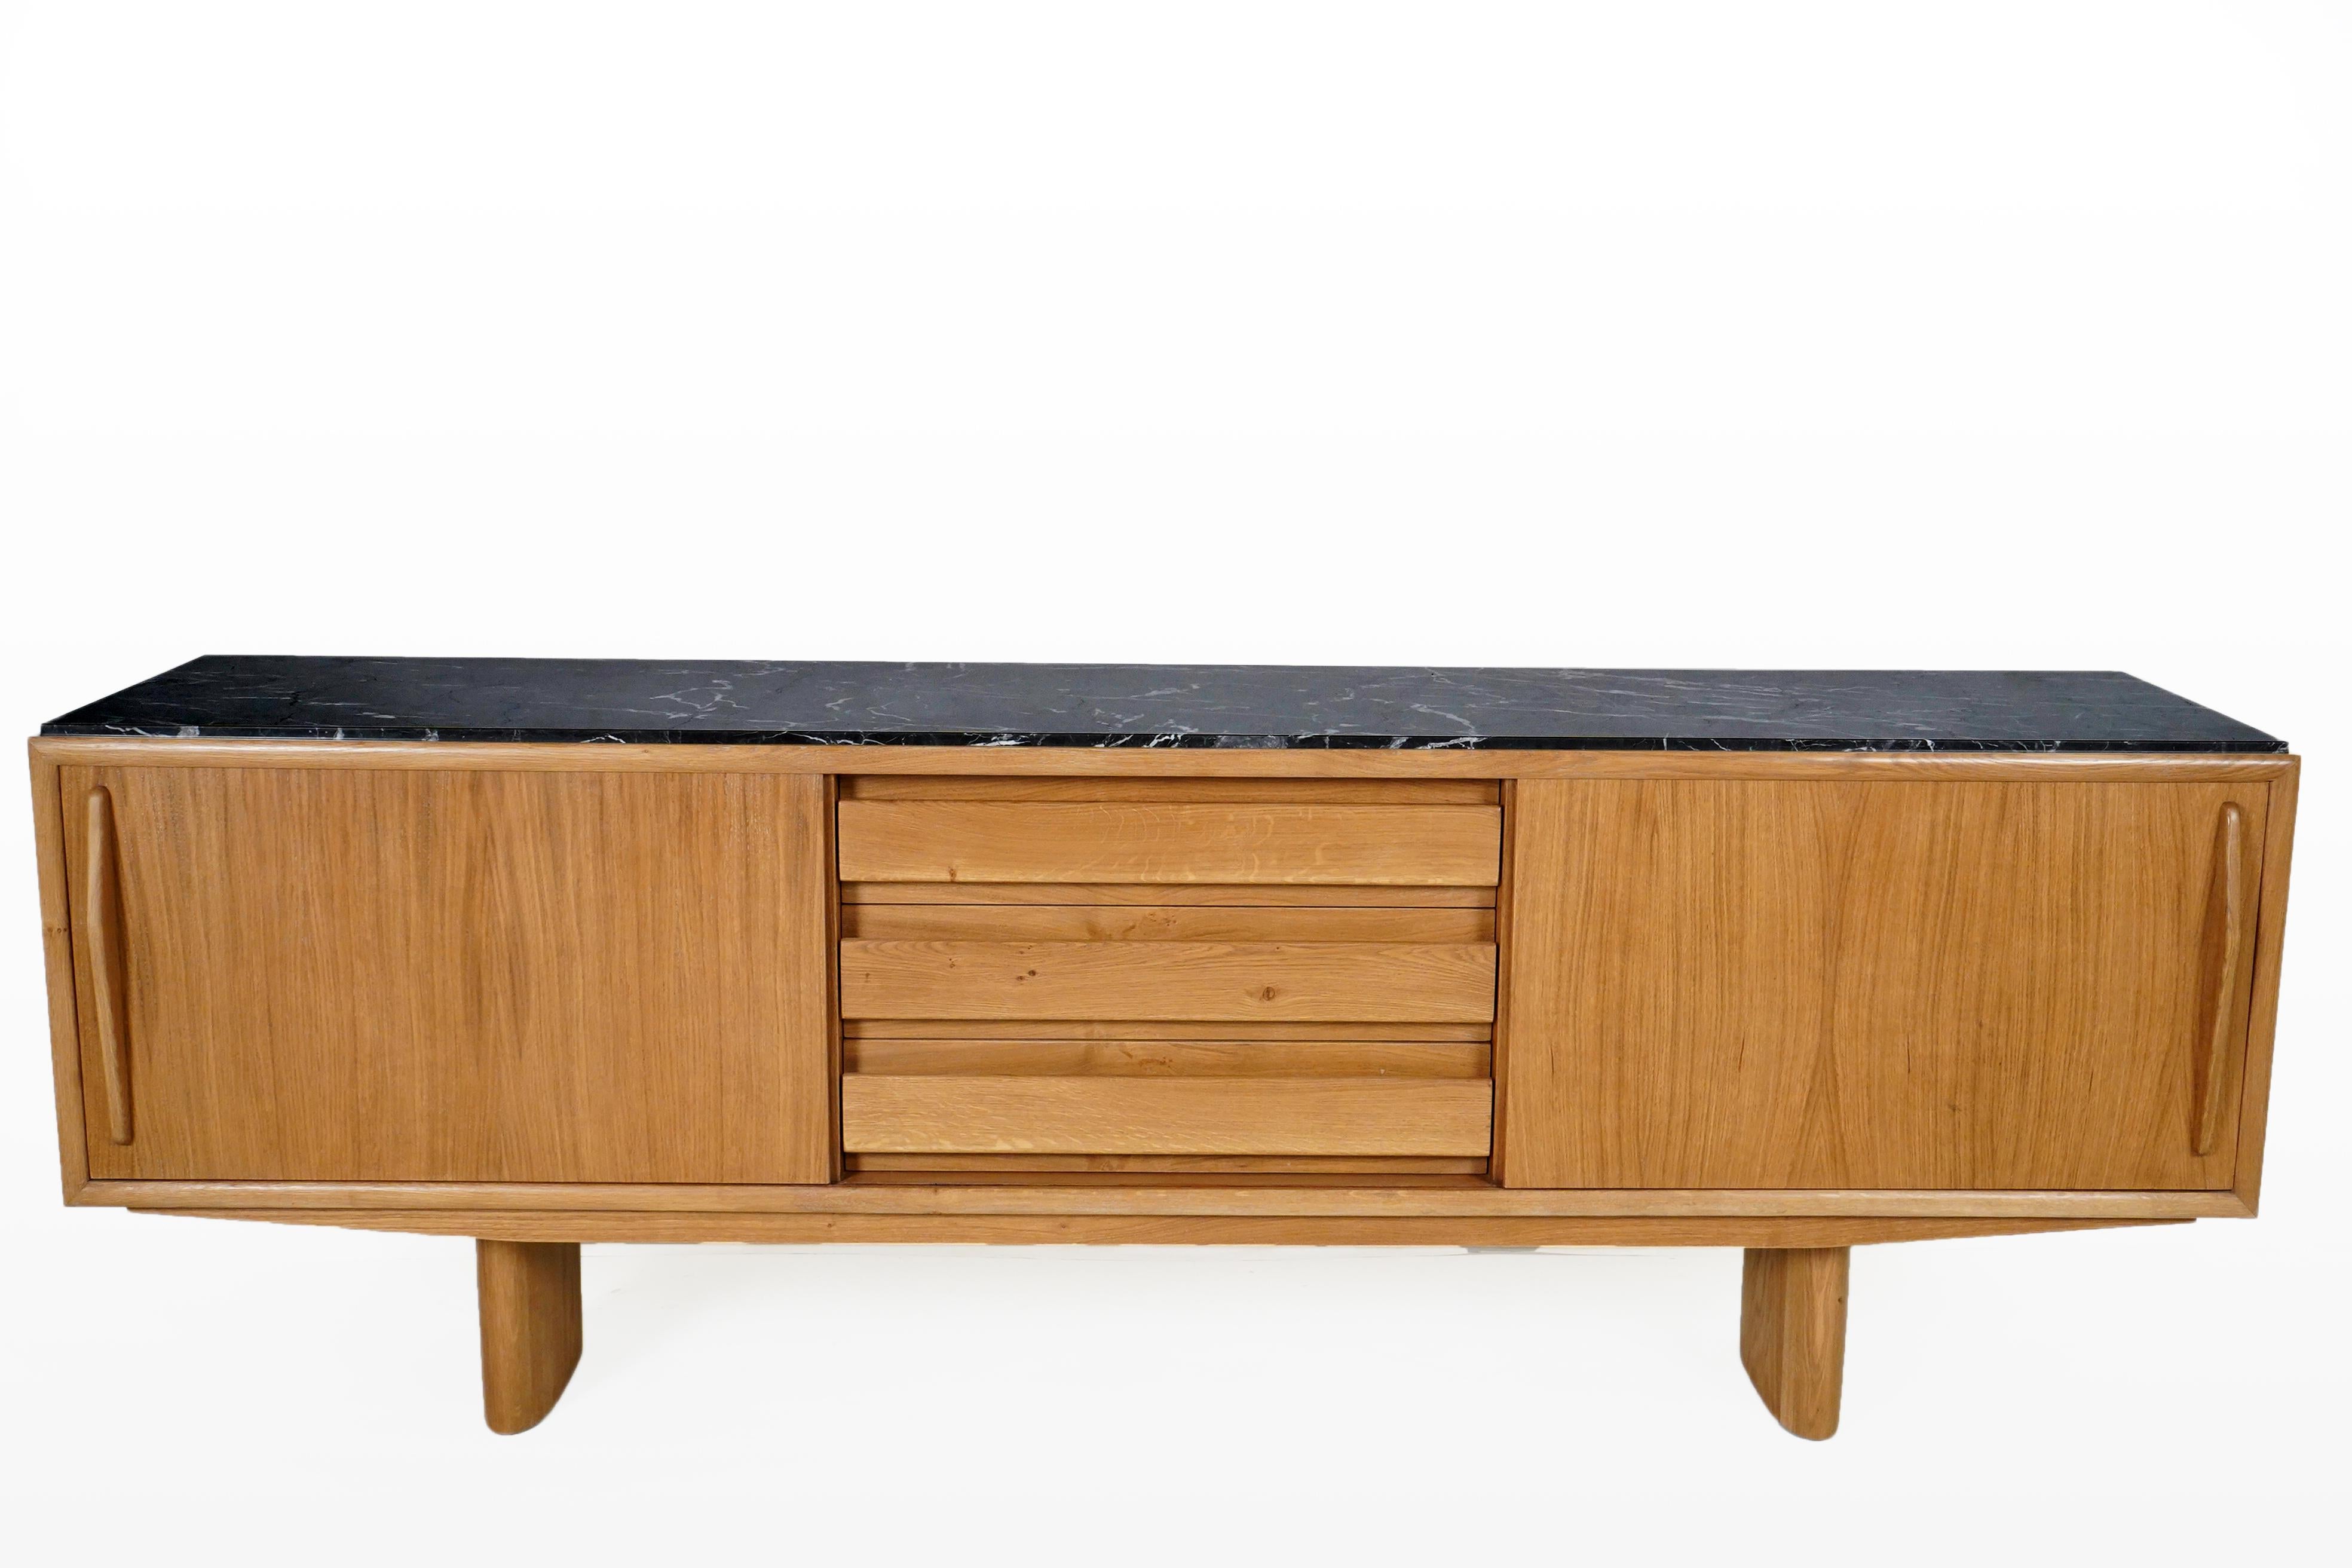 This substantial sideboard combines the beauty of straight-grained Hungarian oak and a black marble top with white veining. The case is long and lovely with two sliding doors covering ample storage bins on each side of the multi-drawered center